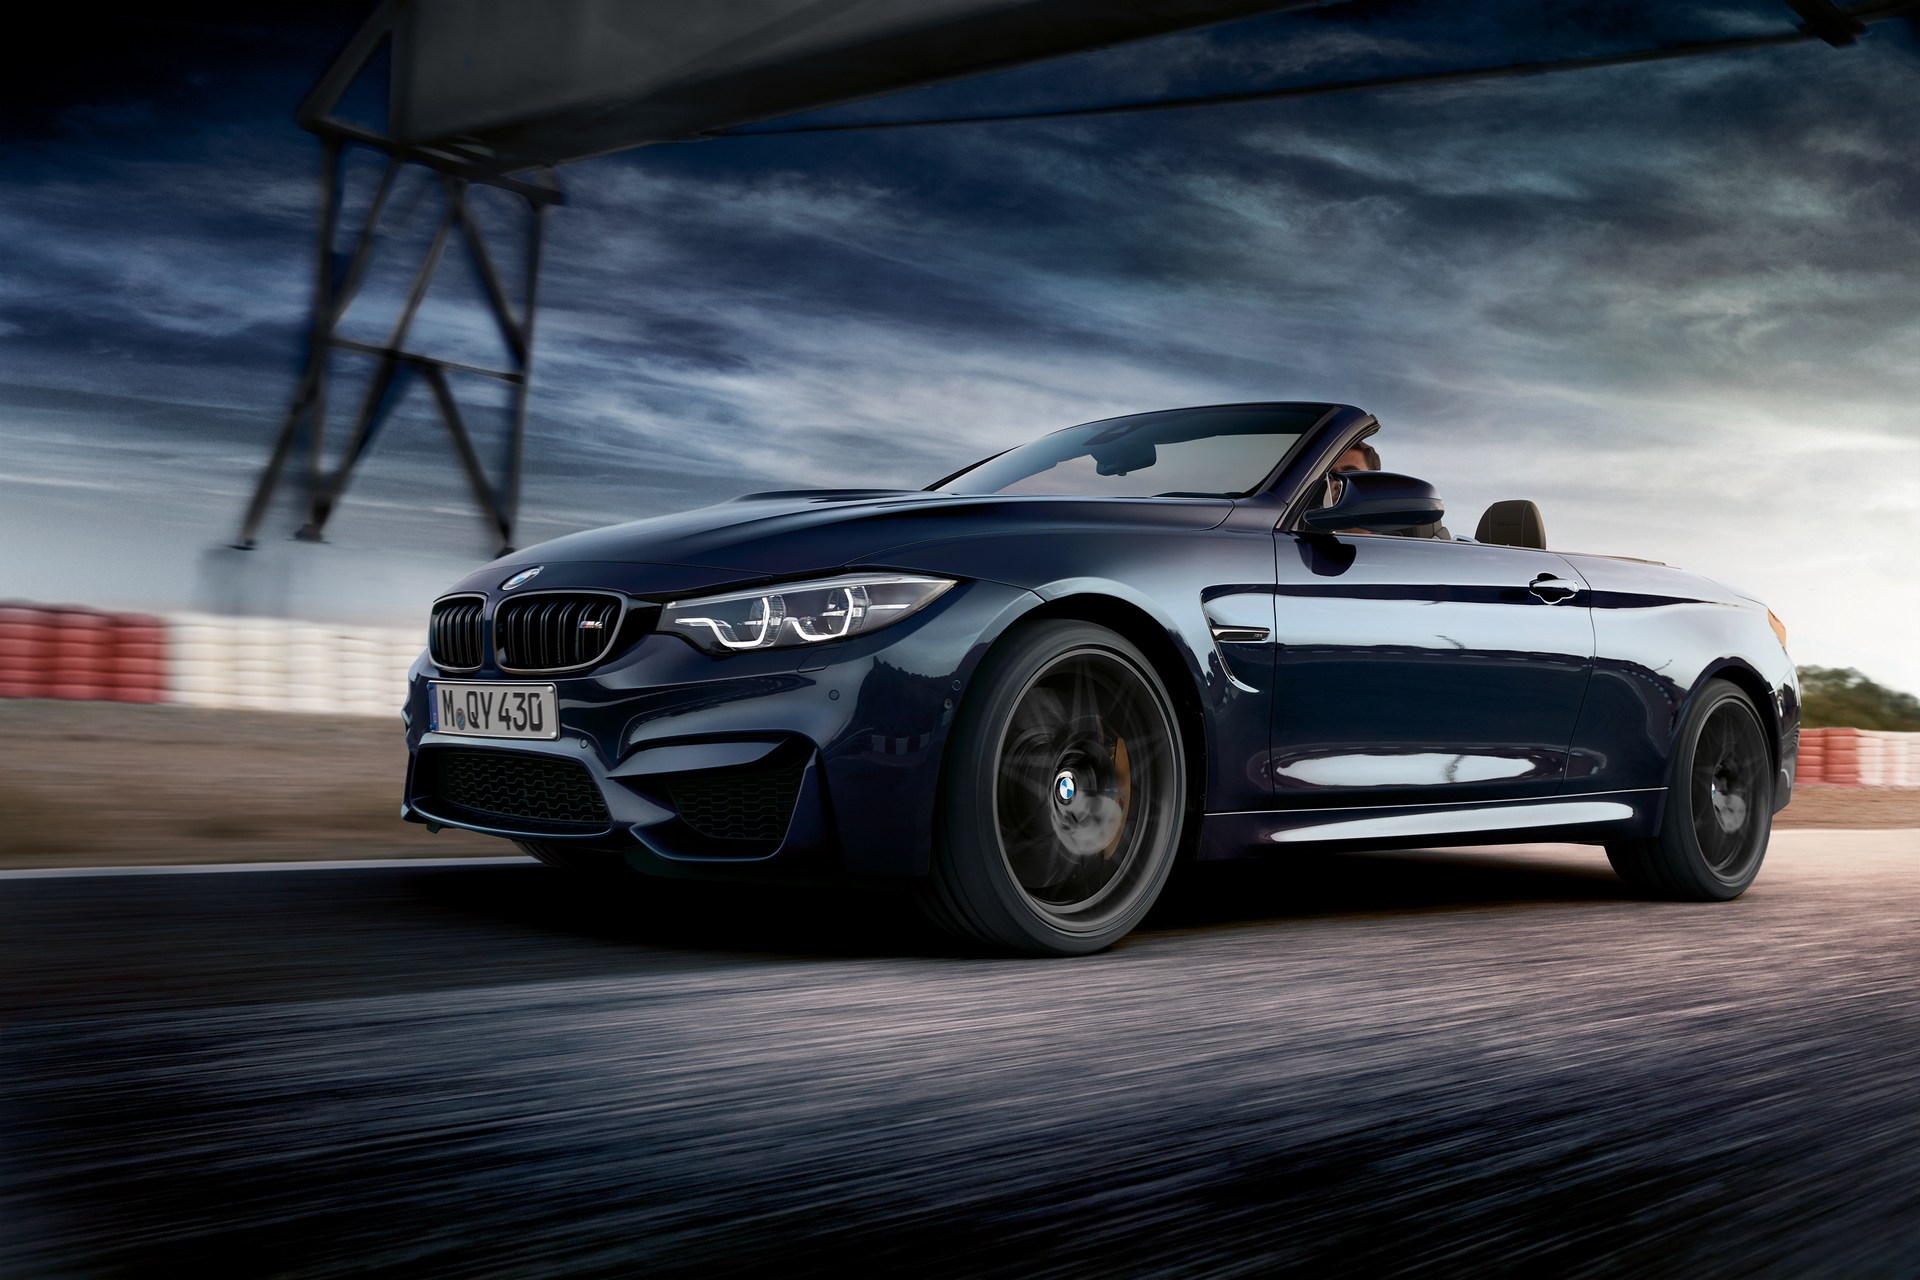 BMW M4 Convertible Edition 30 Jahre Kicks Off, Limited to Just 300 Units